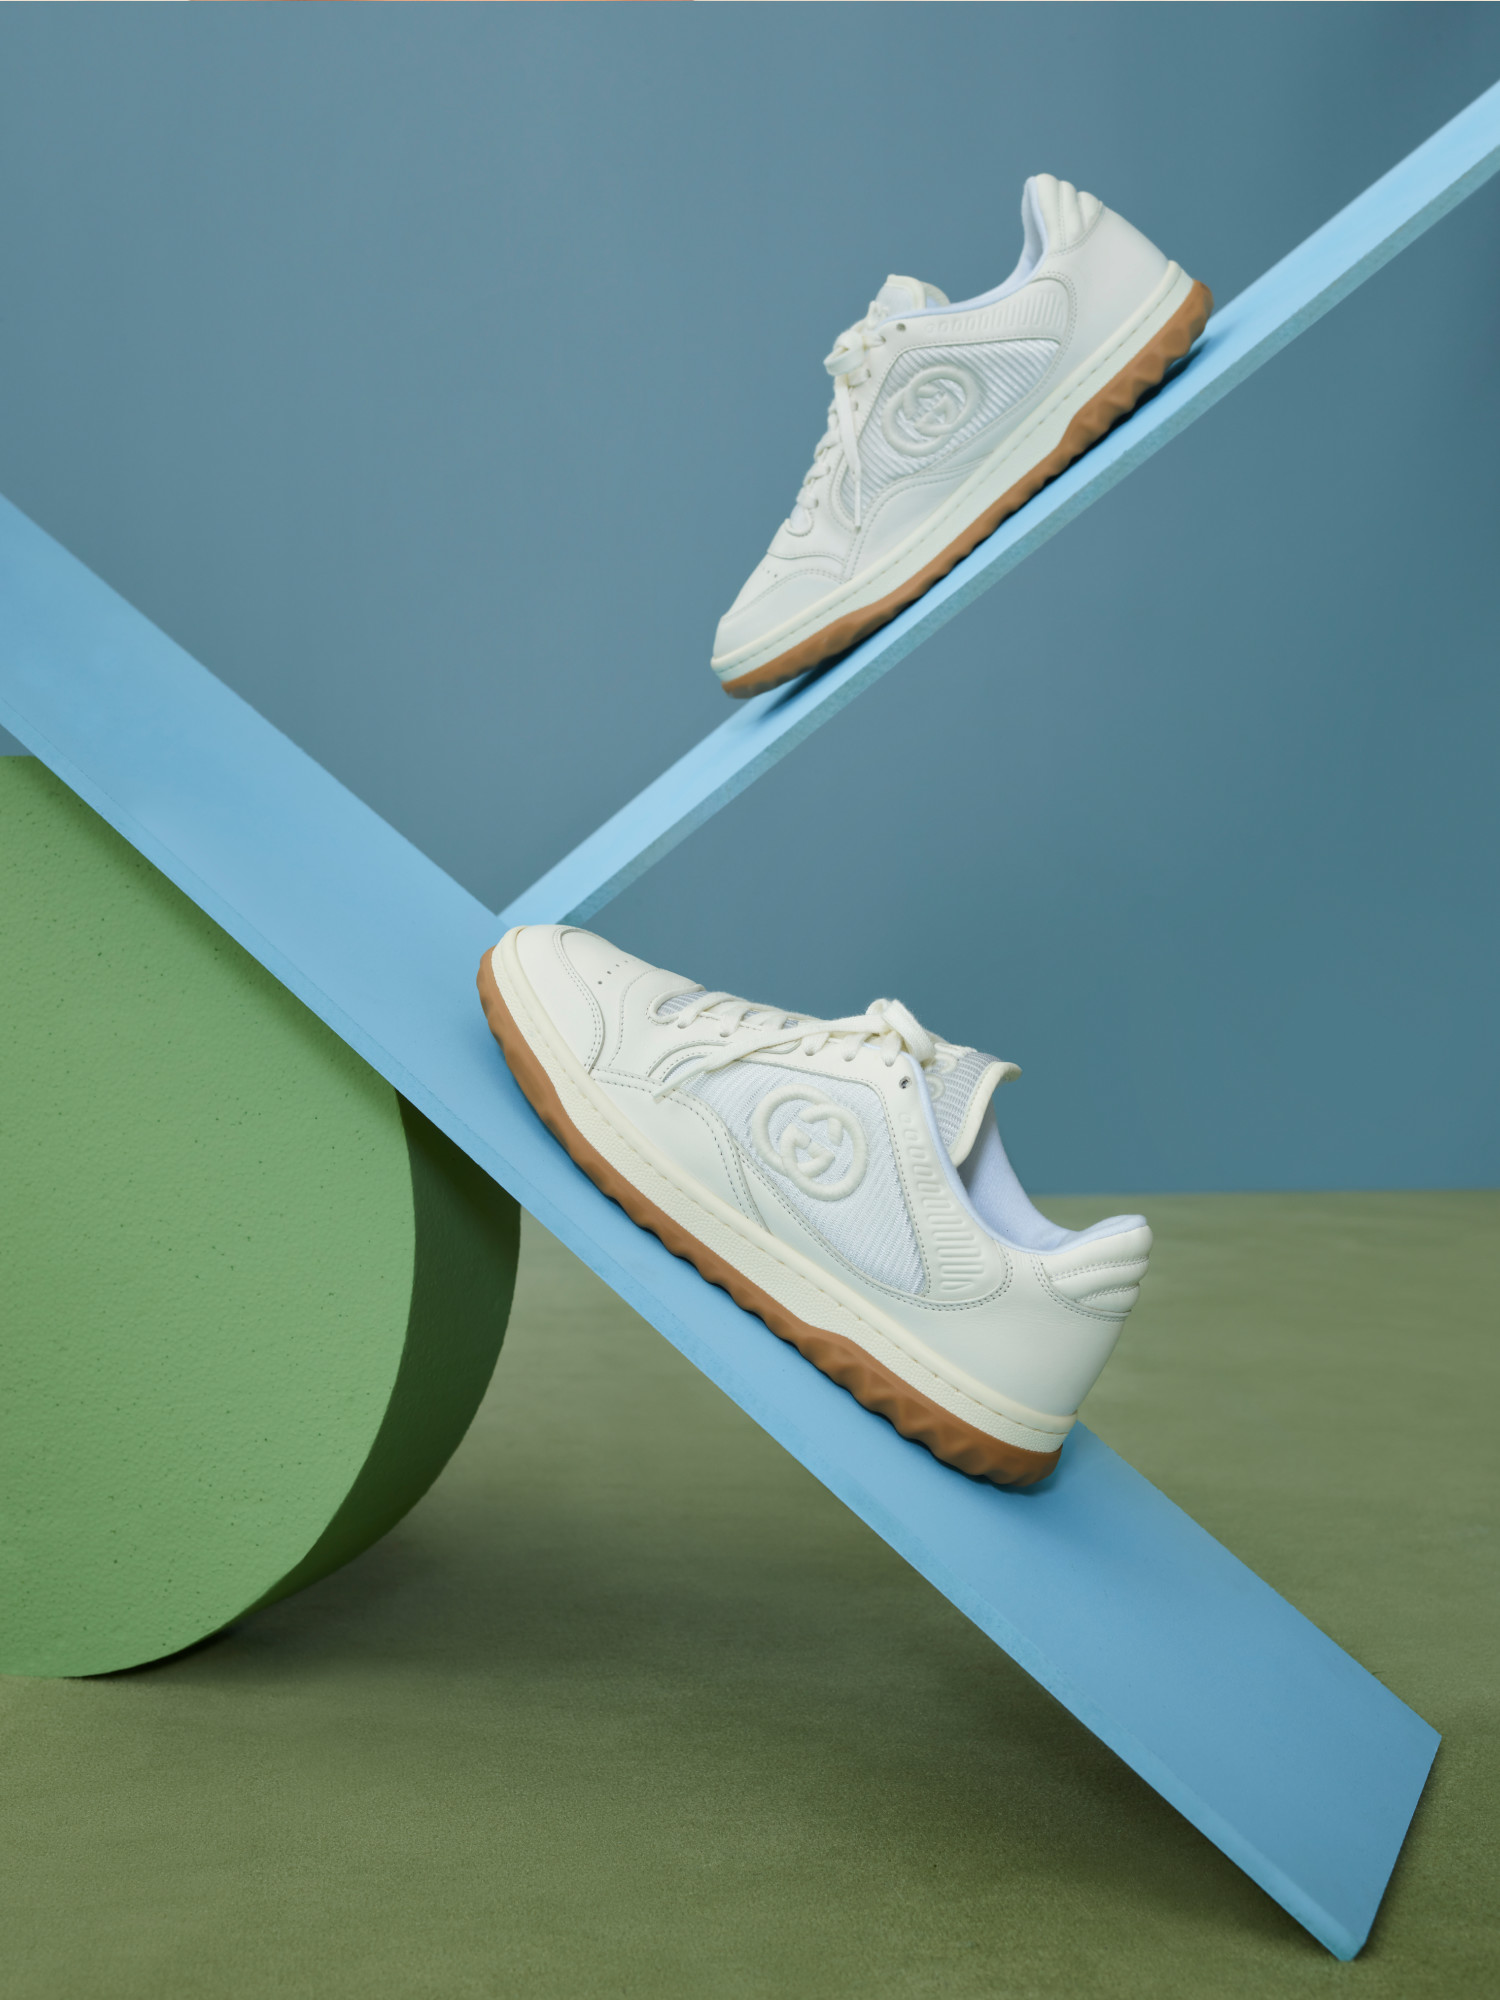 A pair of Gucci Run sneakers in white suede with the Interlocking G logo on a blue see-saw.